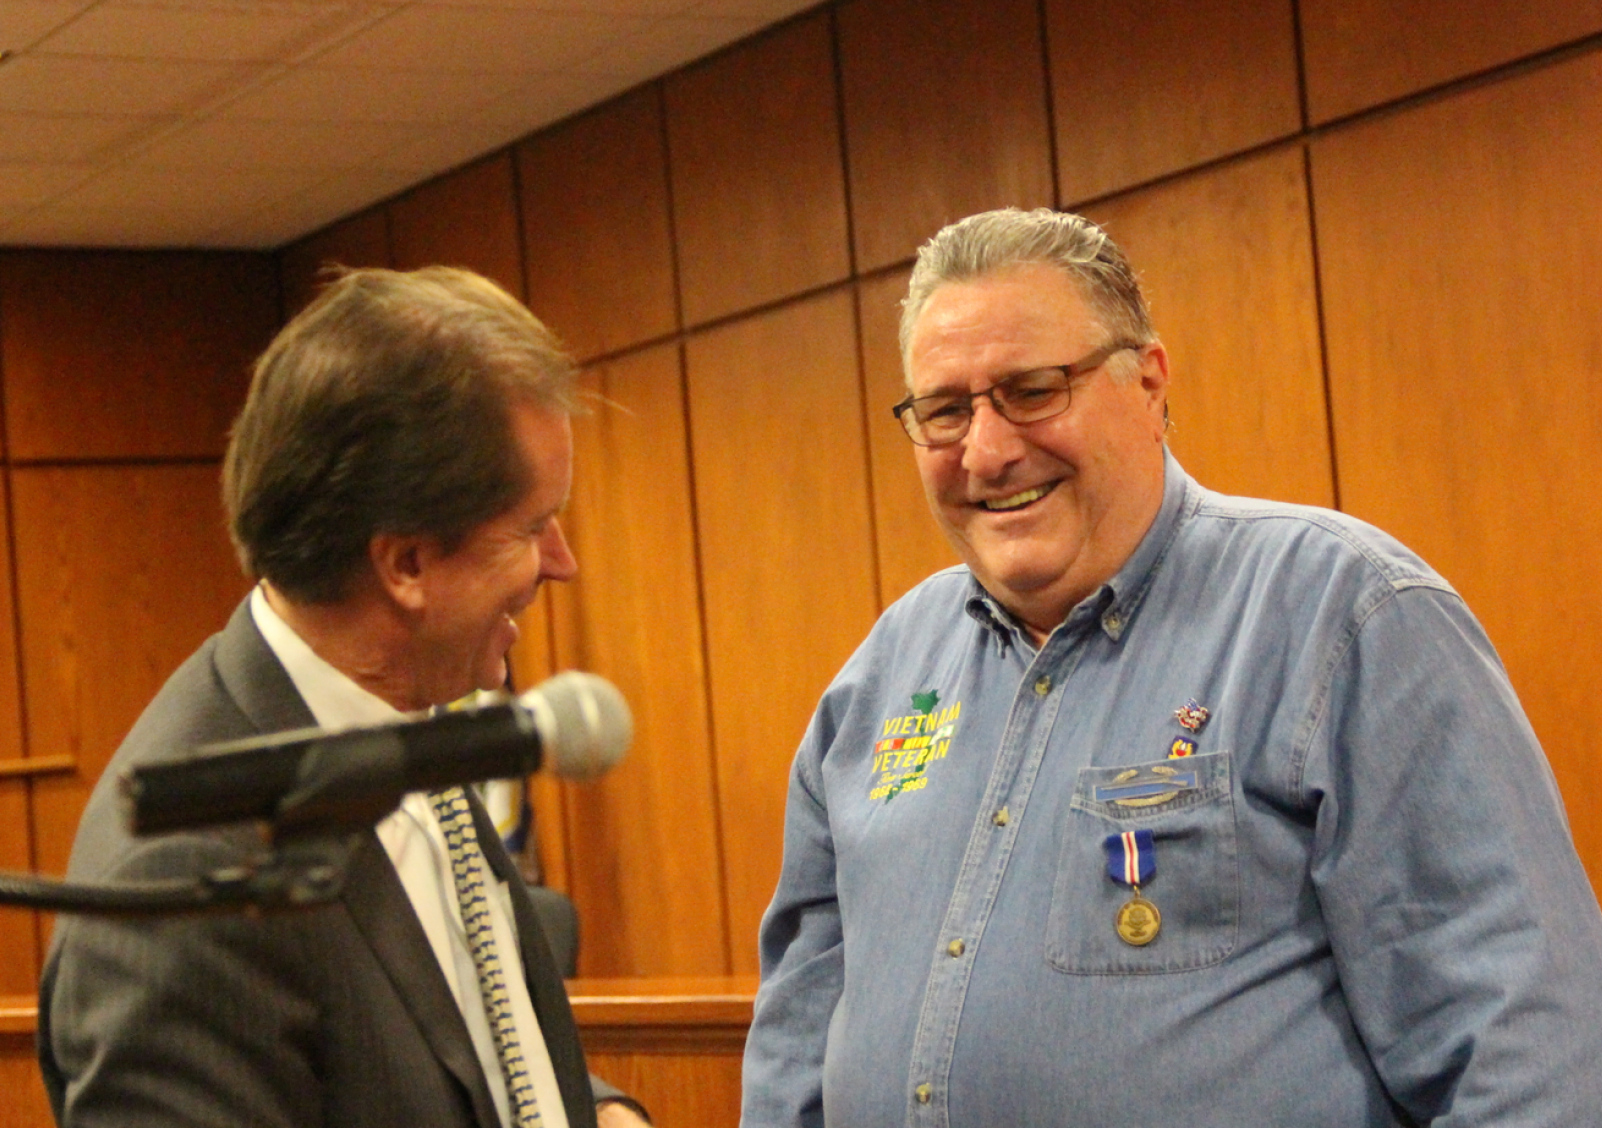 State Senator Scott Frantz presented a medal to SGT Joe Musich who served in the army in Vietnam. Oct 30, 2018 Photo: Leslie Yager